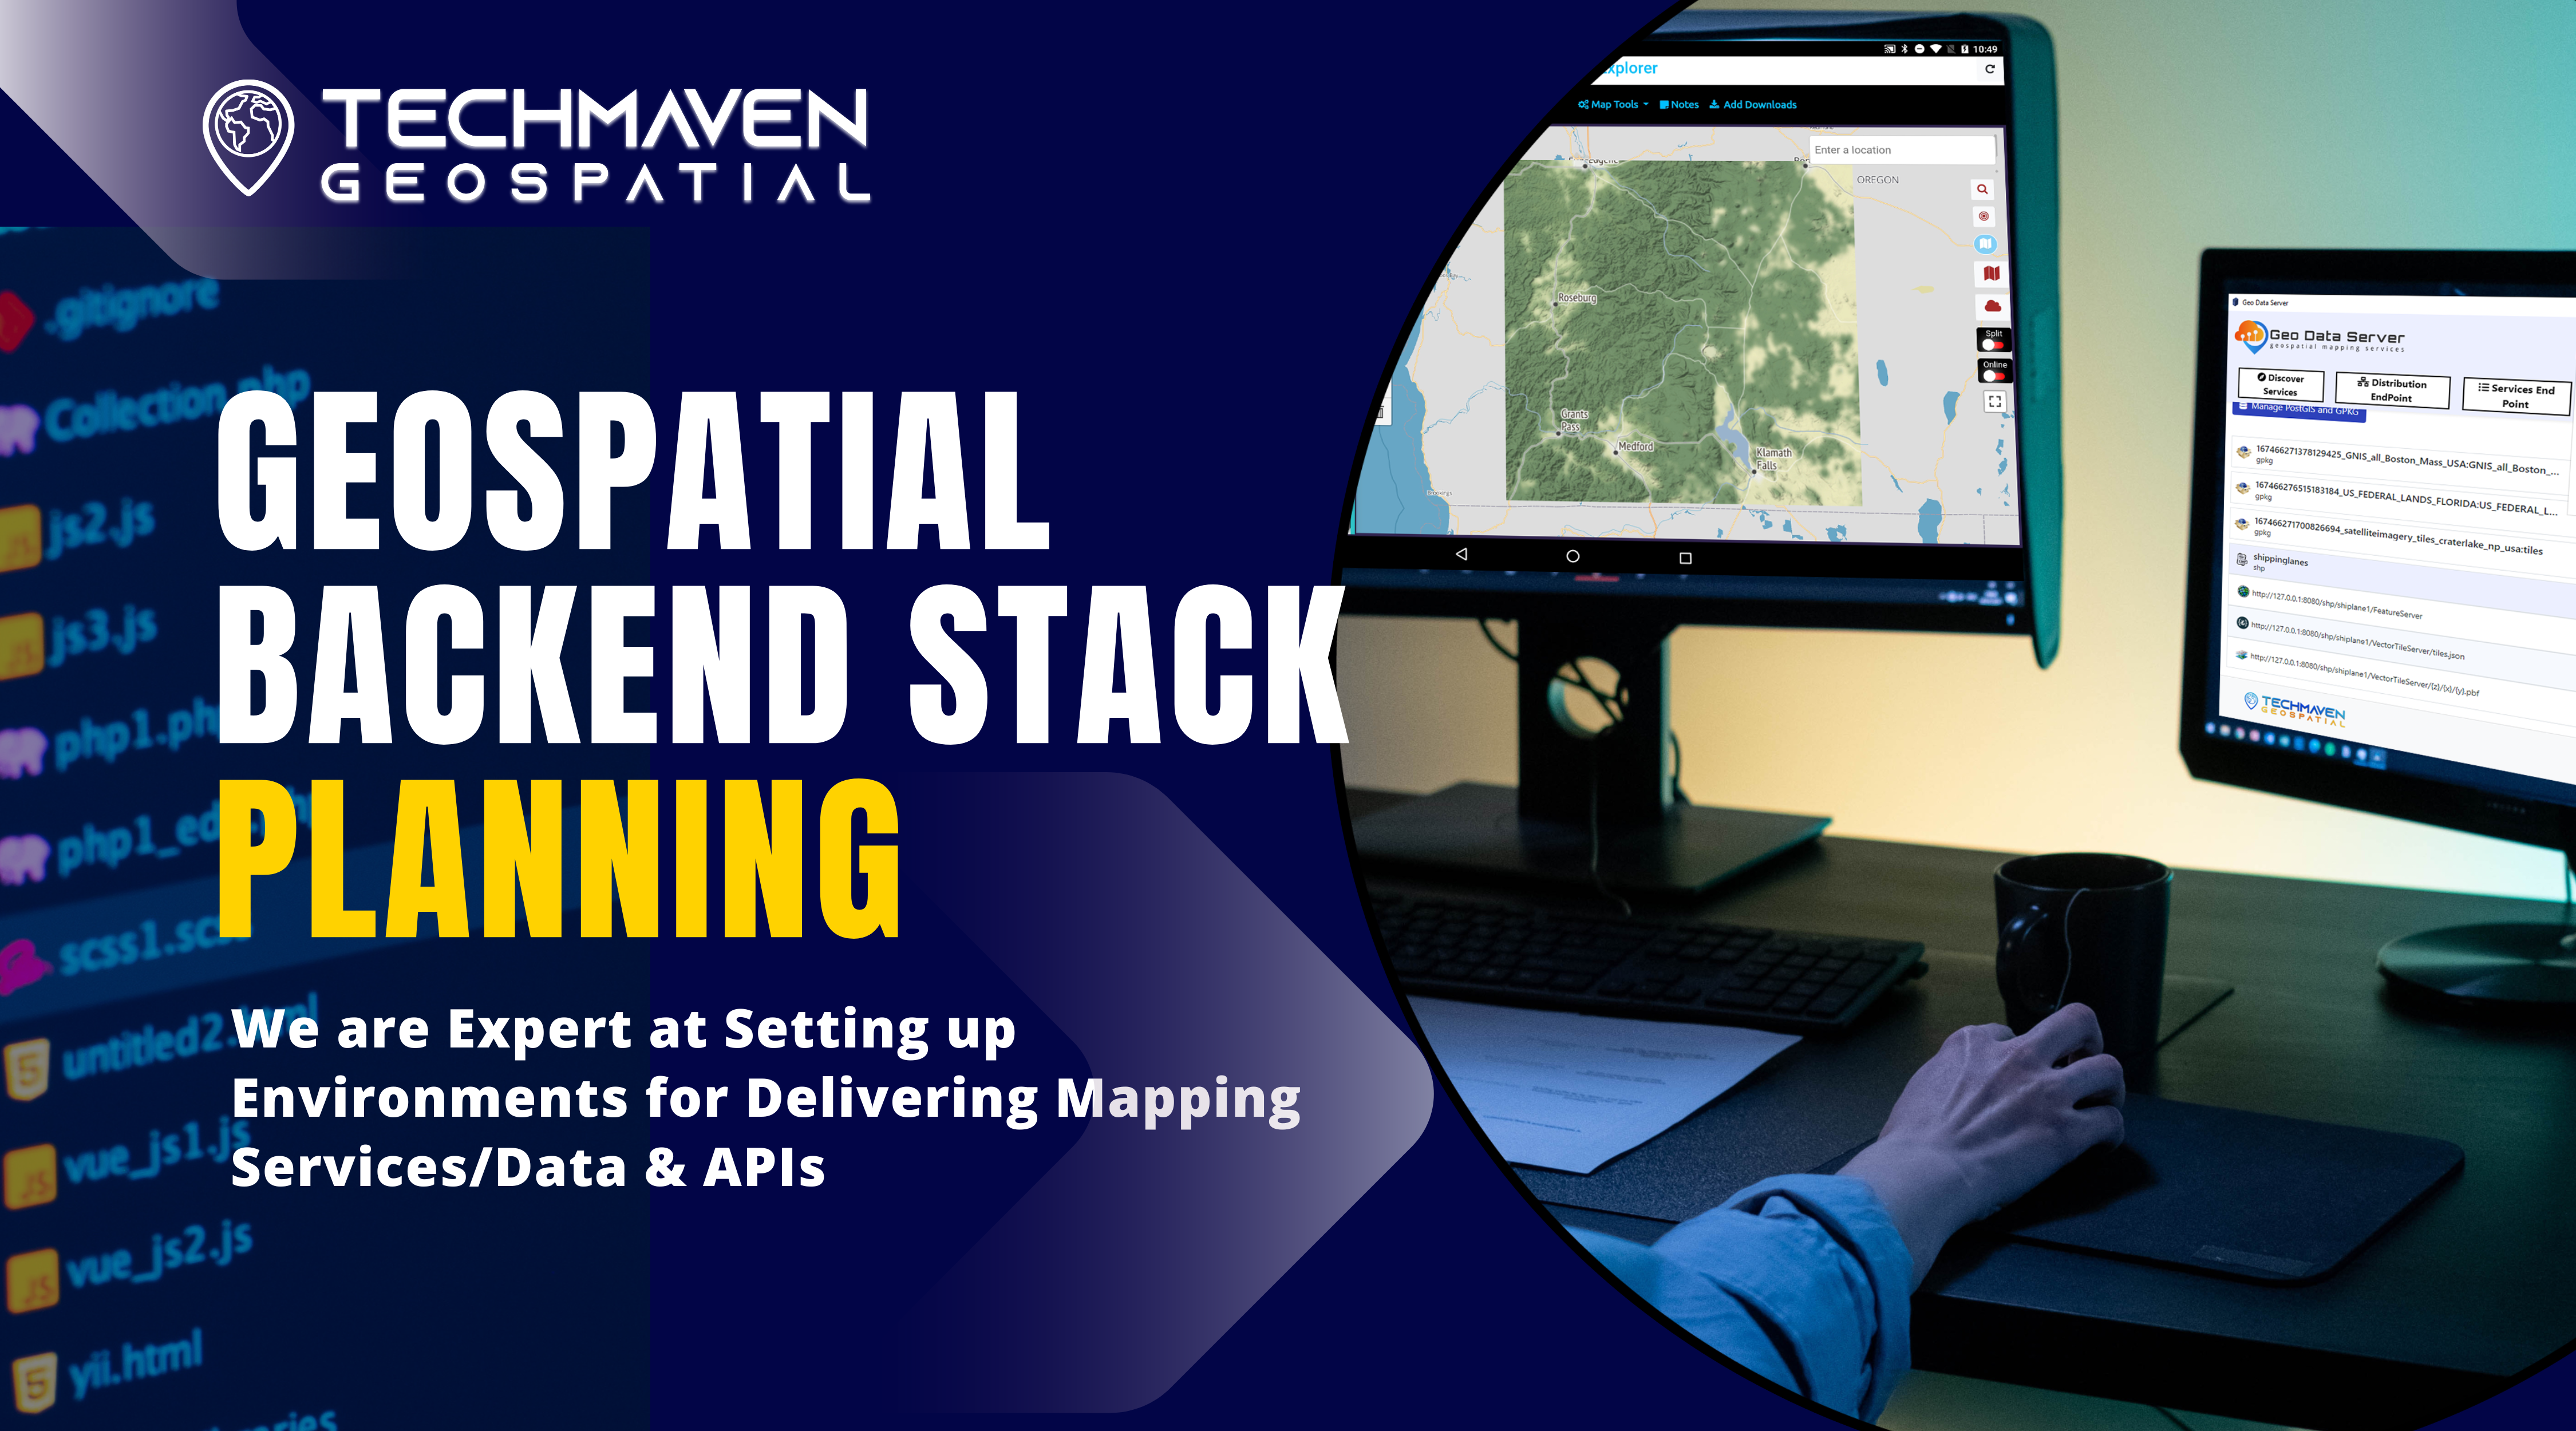 Geospatial back-end stack planning and setup